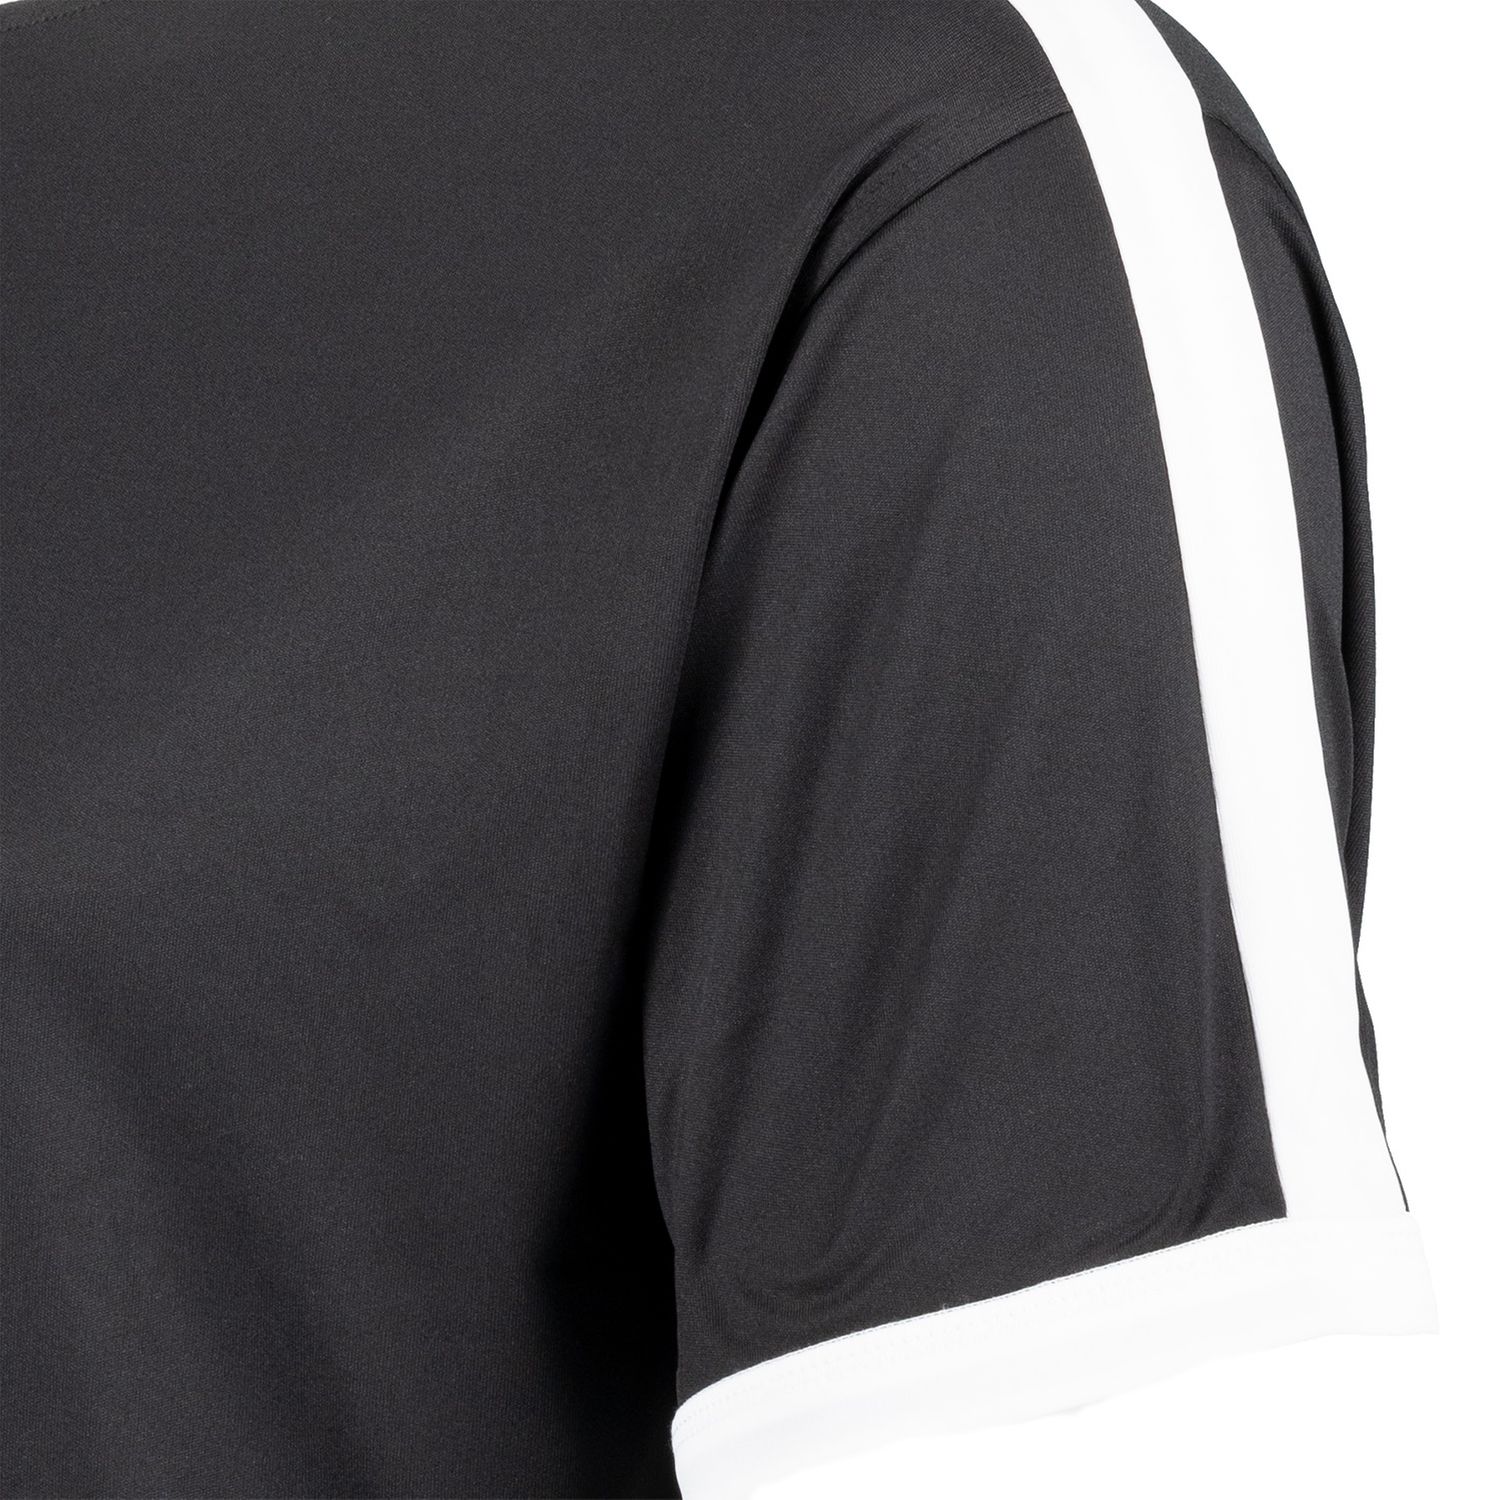 Black functional shirt for men by Adamo series "Marco" COMFORT FIT in oversizes up to 12XL